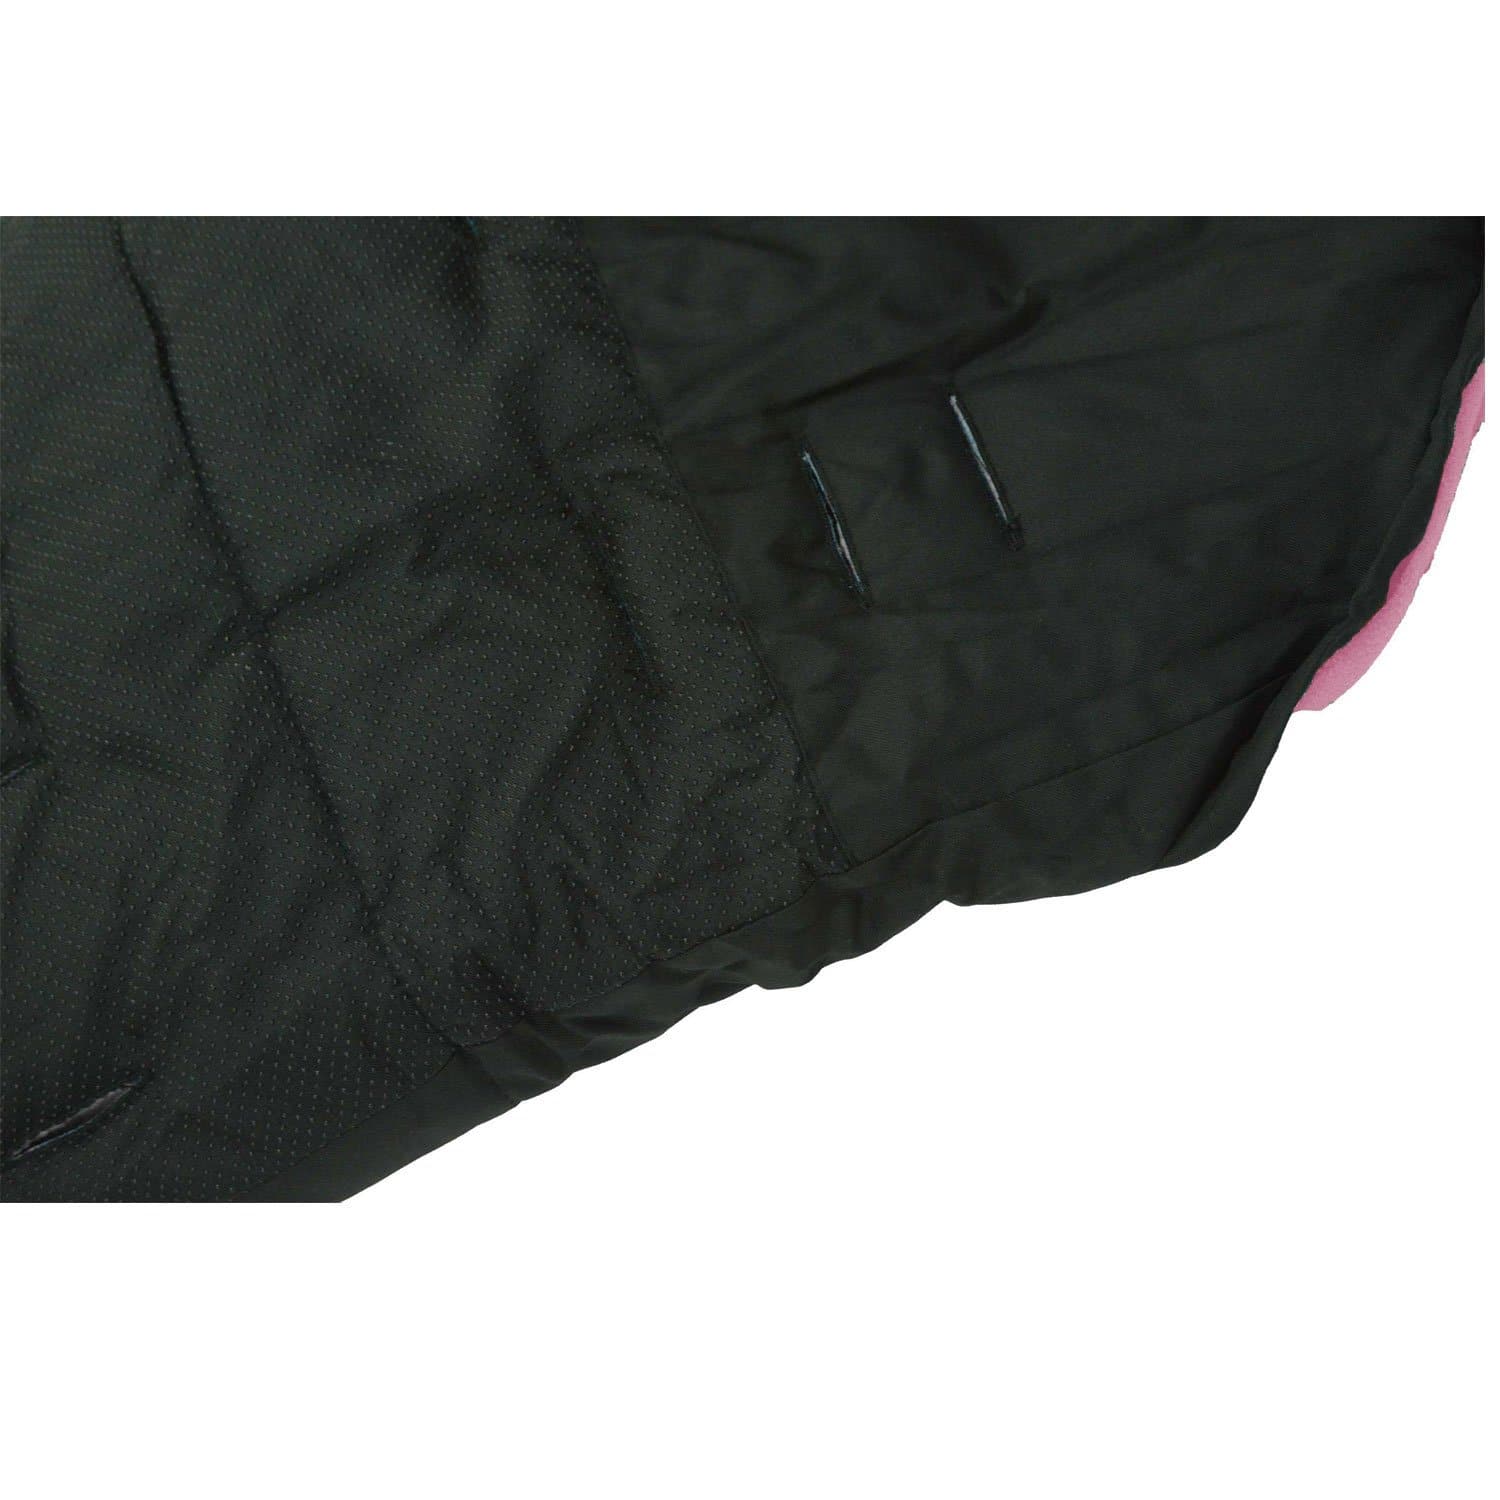 Universal Deluxe Pushchair Footmuff / Cosy Toes - Fits All Pushchairs / Prams And Buggies   